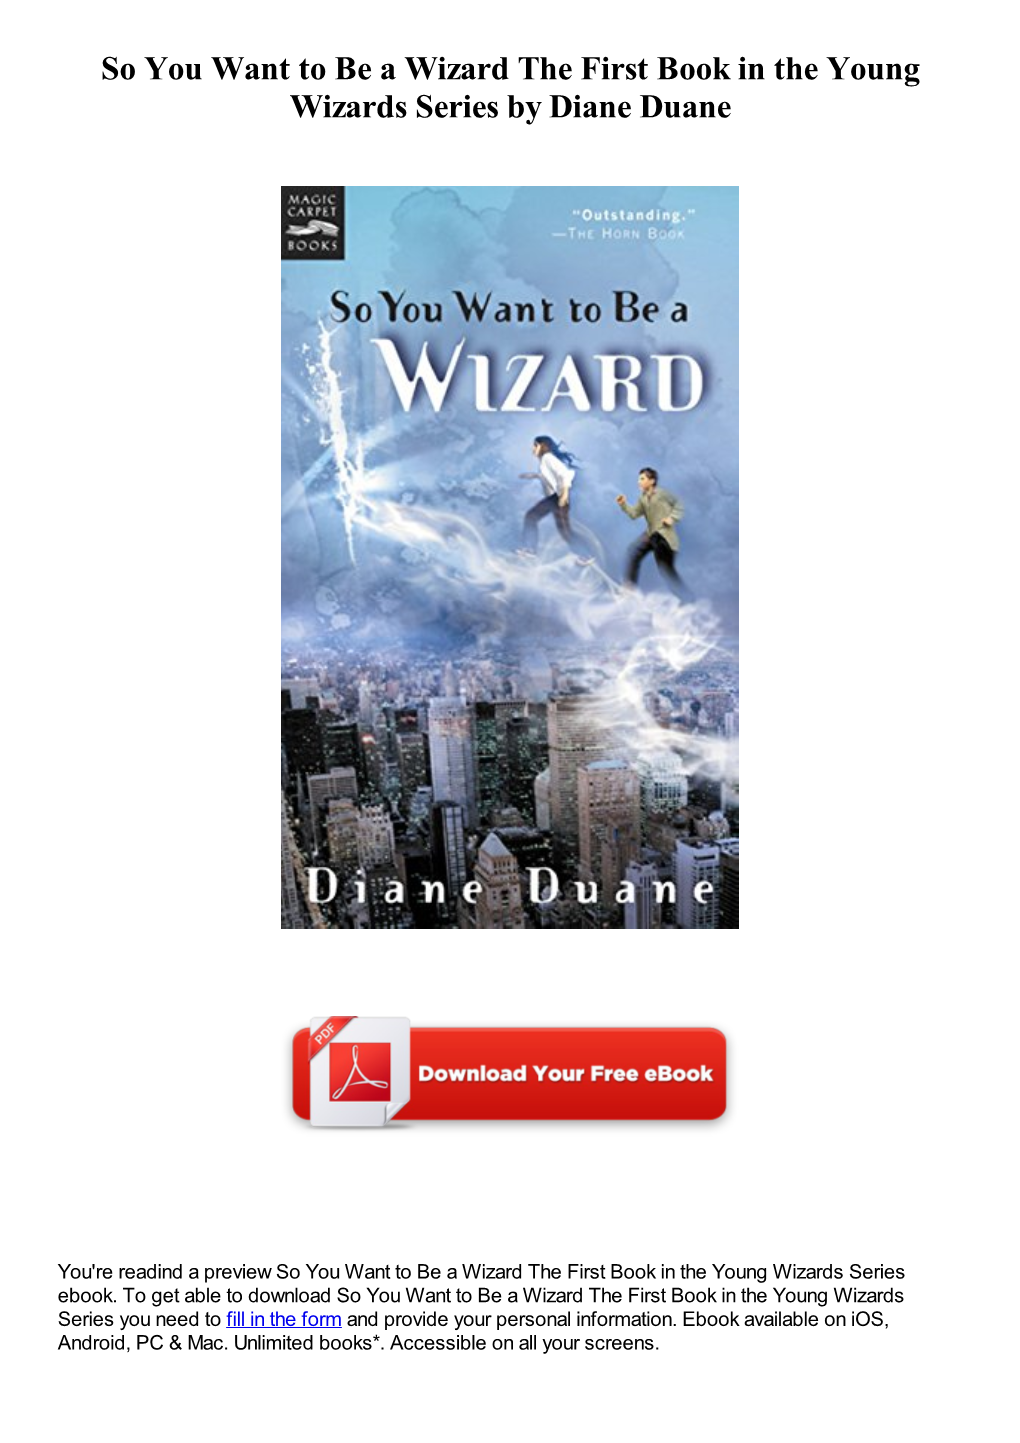 So You Want to Be a Wizard the First Book in the Young Wizards Series by Diane Duane